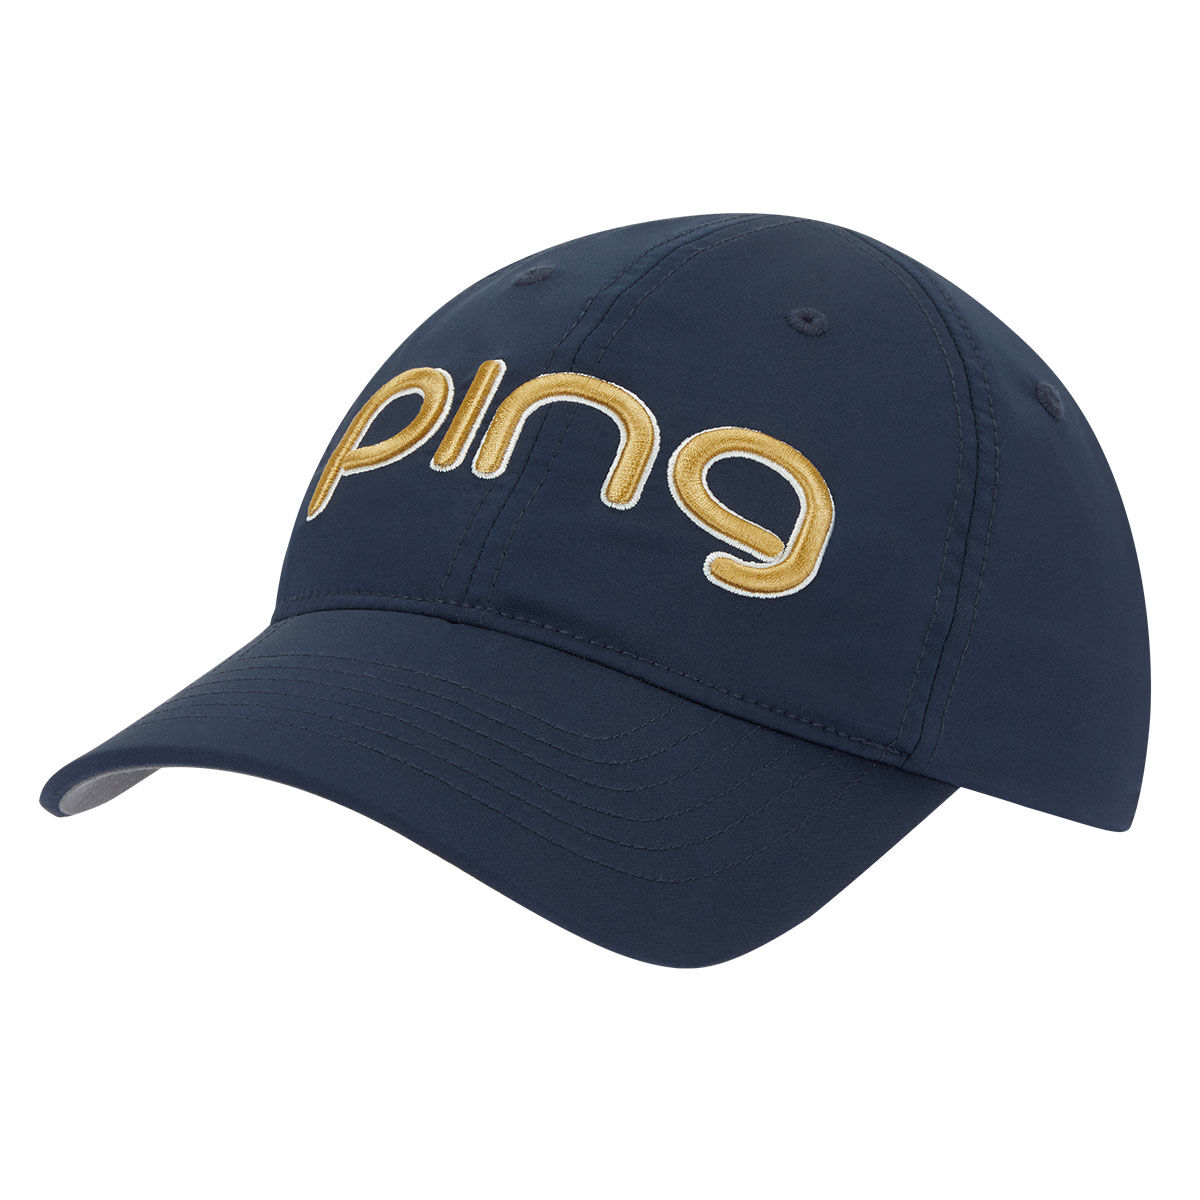 PING Women's Navy Blue and Gold Embroidered G Le3 Tour Delta Golf Cap | American Golf, One Size von Ping